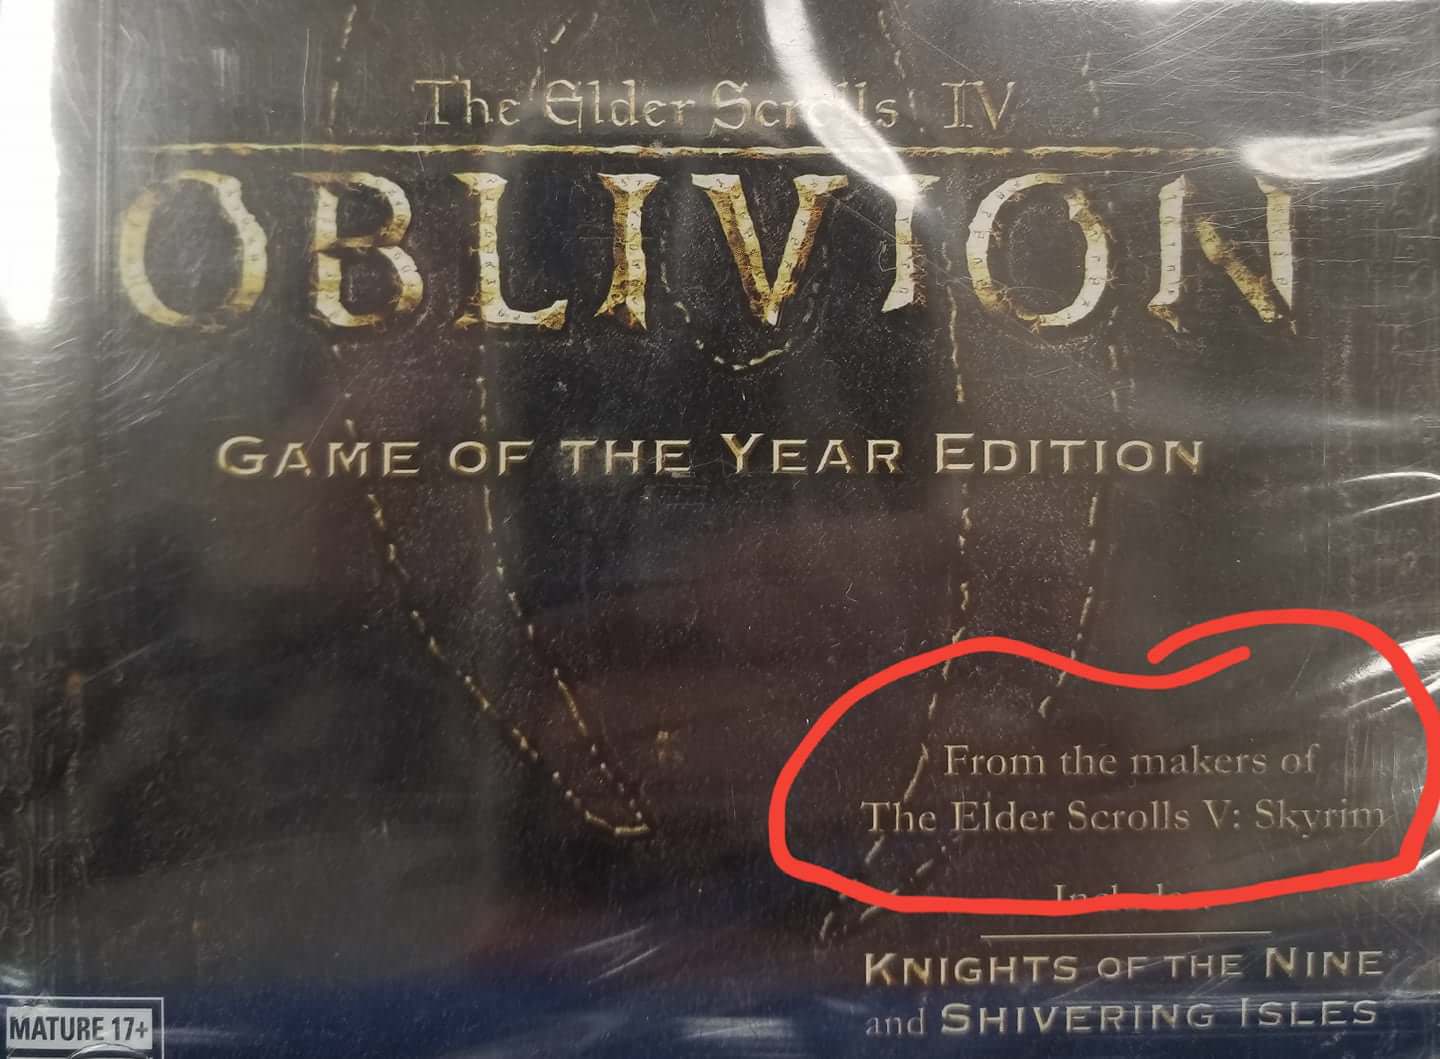 says a lot about our society - The Elder Scris Iv Oblivion Game Of The Year Edition From the makers of The Elder Scrolls V Skyrim Knights Of The Nine and Shivering Isles Mature 17